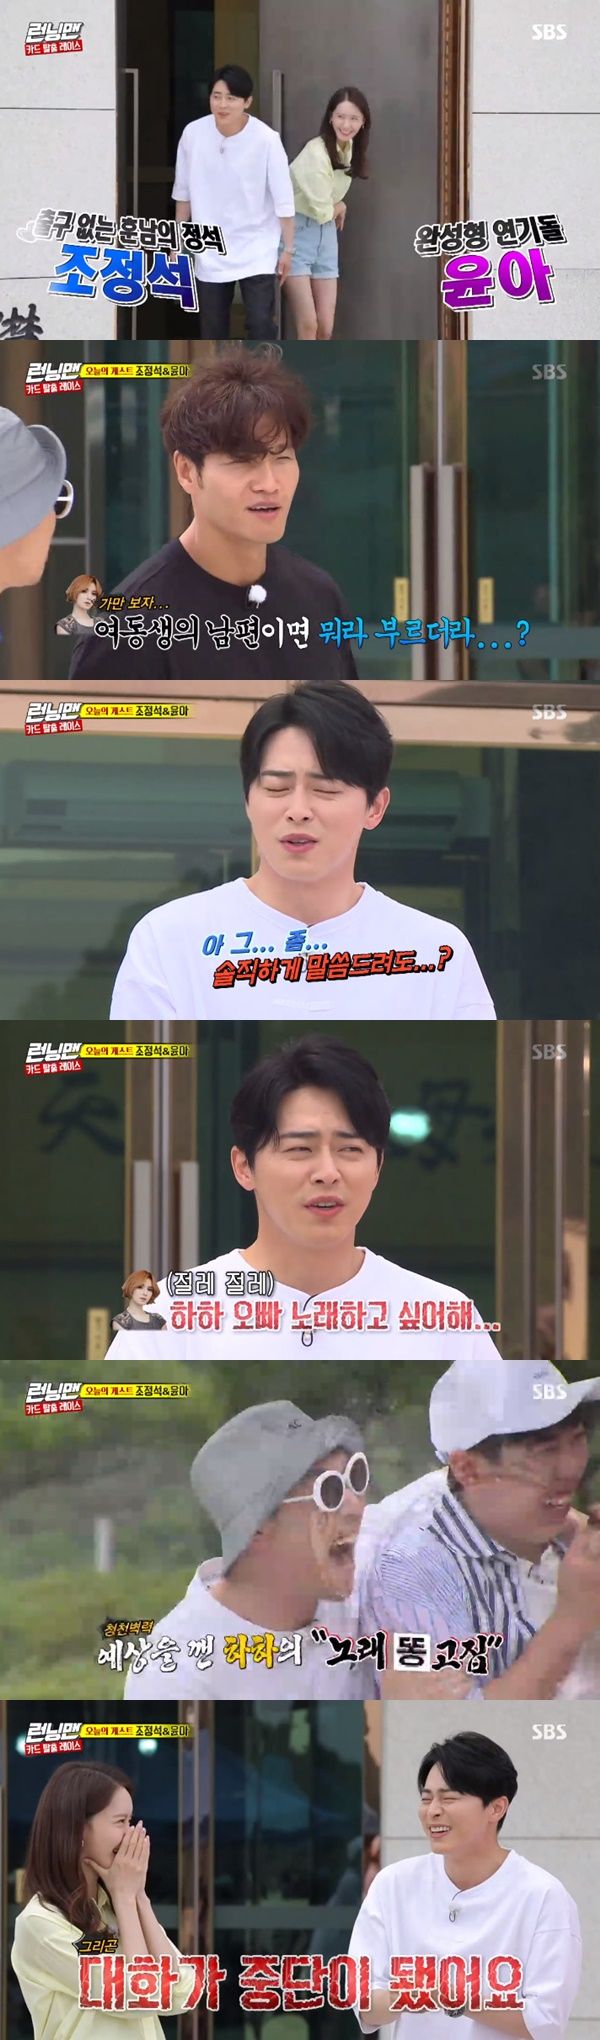 In Running Man, Jo Jung-suk gave a testimony of the spider who collaborated with Haha and Kim Jong-kook.On the 21st, SBS entertainment program Running Man appeared as a guest of the main actors Jo Jung-suk and Yoona of the movie Exit.Earlier last week, Jo Jung-suks wife and singer, Spider, appeared on the show.Kim Jong-kook and Haha, who collaborated together, welcomed the guests appearance more than anyone else.MC Yoo Jae-seok said, The spider came and went to the show, but did not you go home and have any stories?Jo Jung-suk said, Can I say something frankly?Jo Jung-suk said: I wanted to hear it at first and be so good.So, eventually, my brother and spider sing, and Haha brother said that it would be so cool if he rap. Then the spider shook his head and said, Haha wants to sing. Jo Jung-suk then added, The conversation was then stopped, adding, Im laughing.